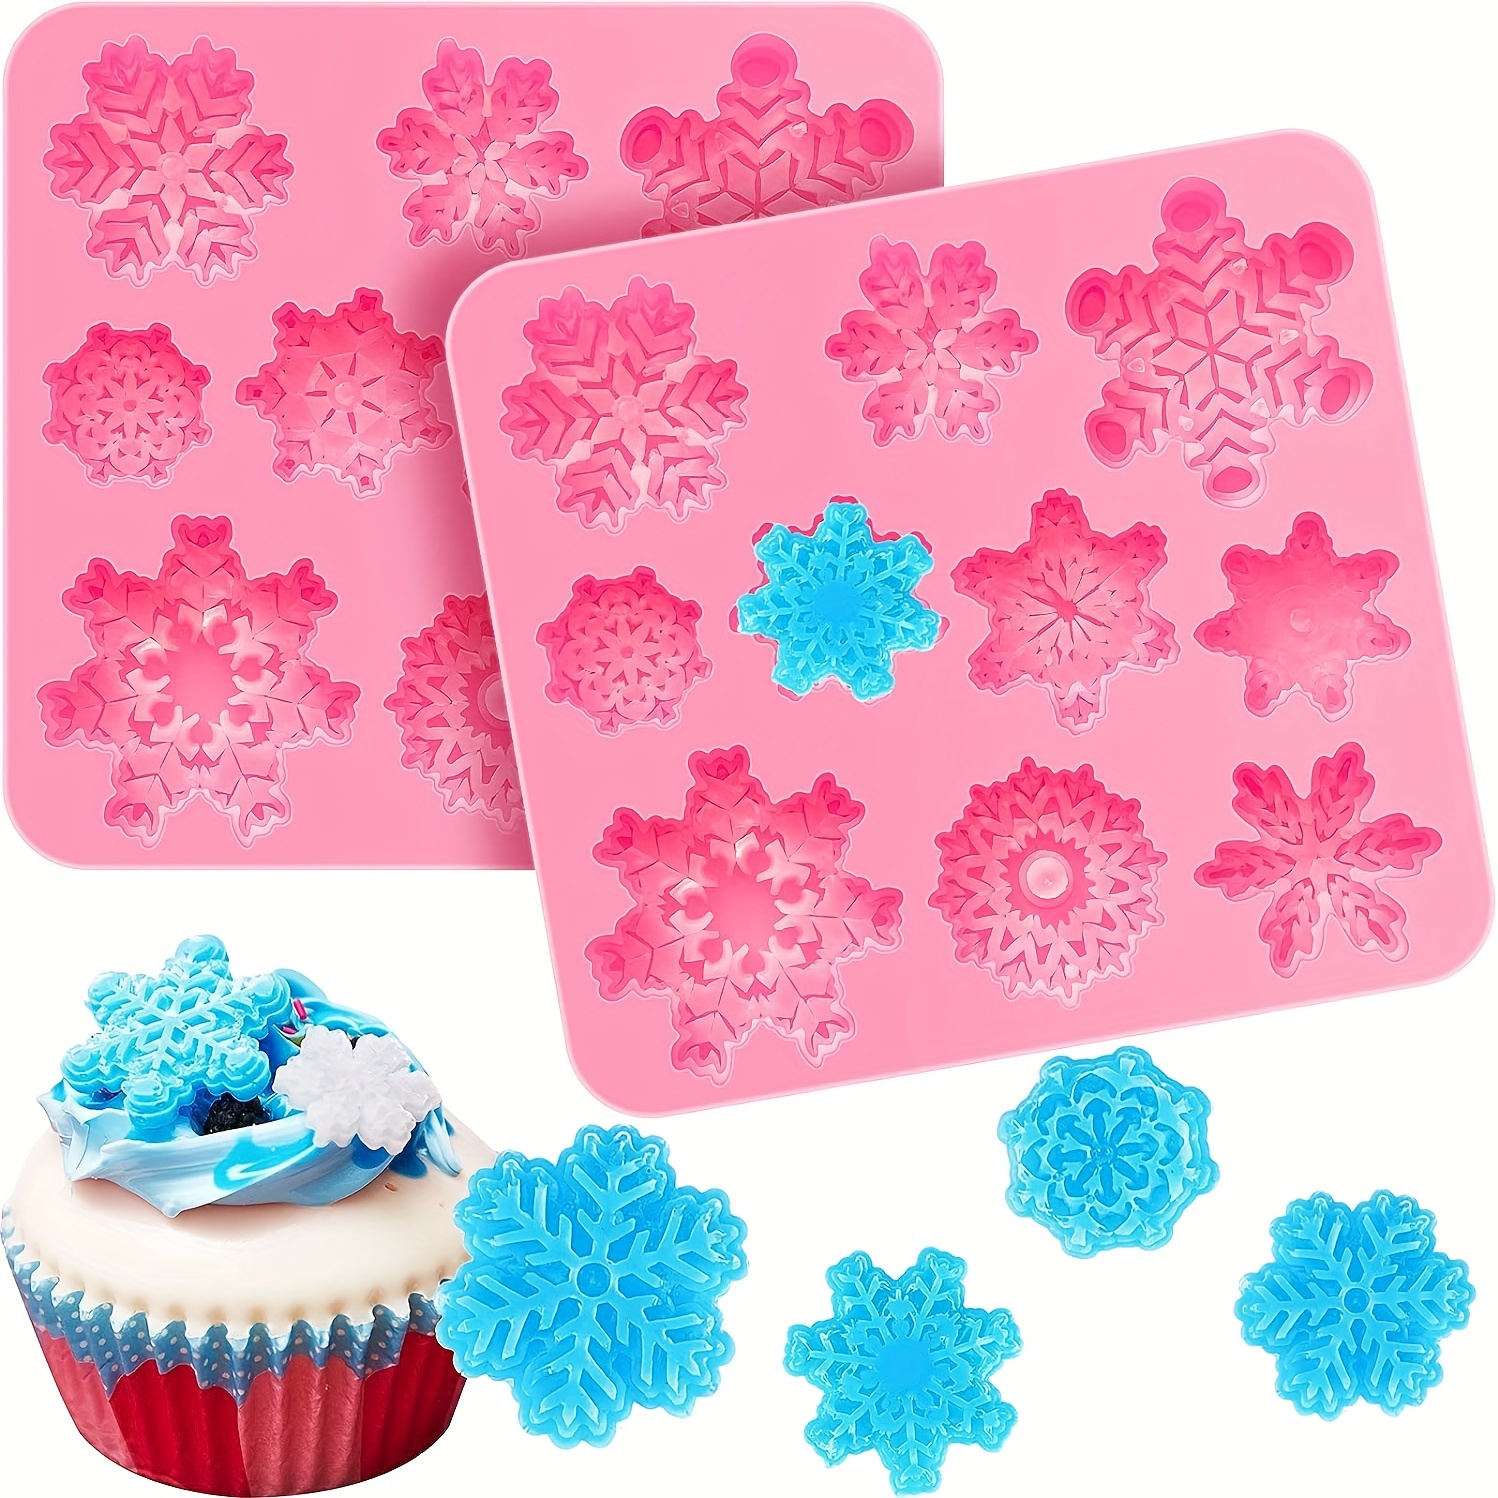 2 Pcs Snowflake Chocolate Molds Silicone Large for Winter Cake